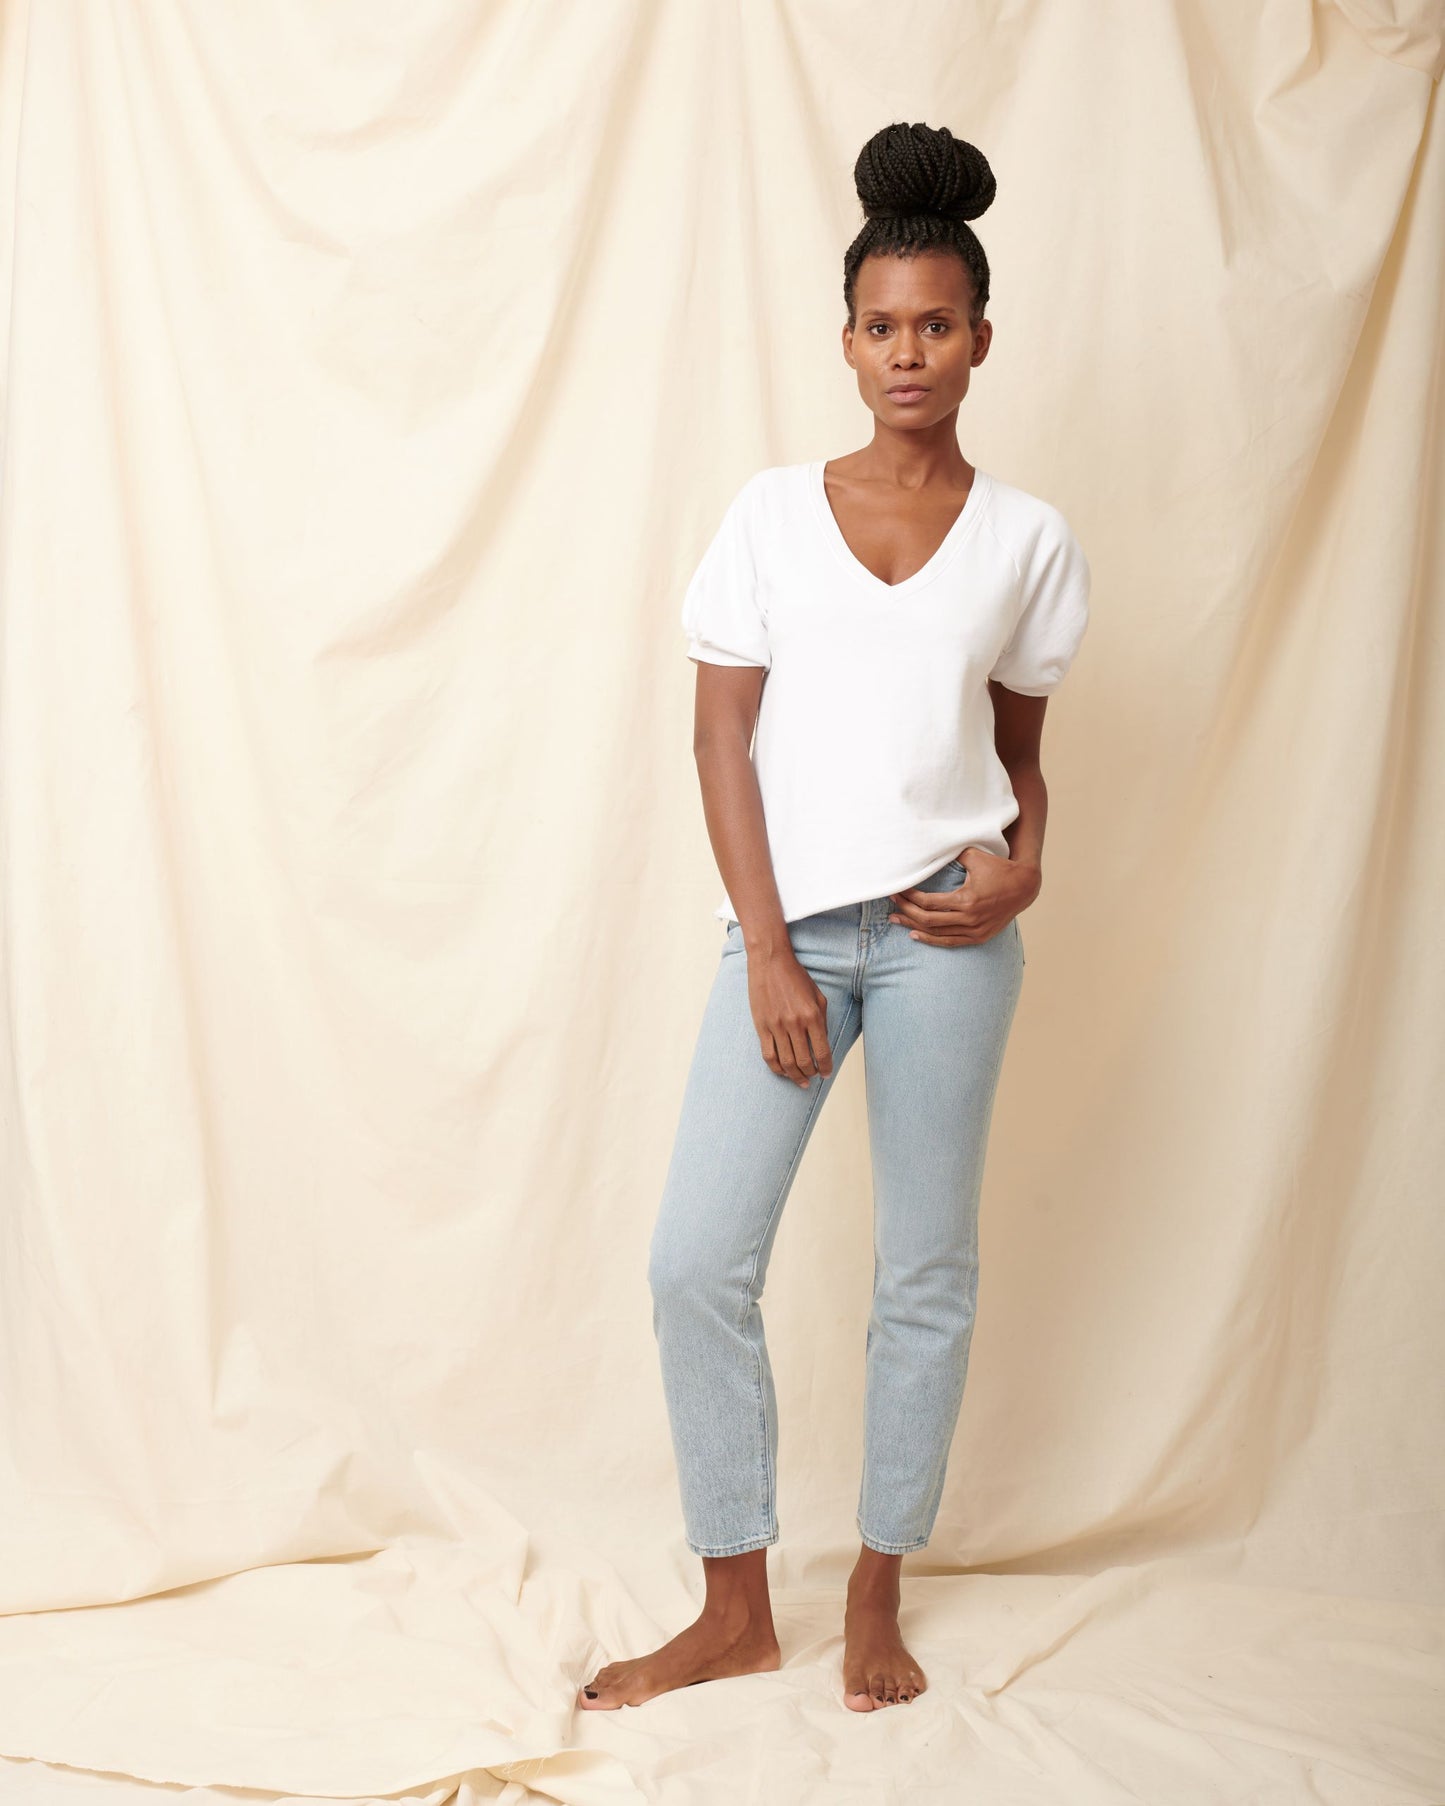 Black model wearing white organic cotton v-neck sweatshirt and blue jeans with hand in pocket and bun in hair